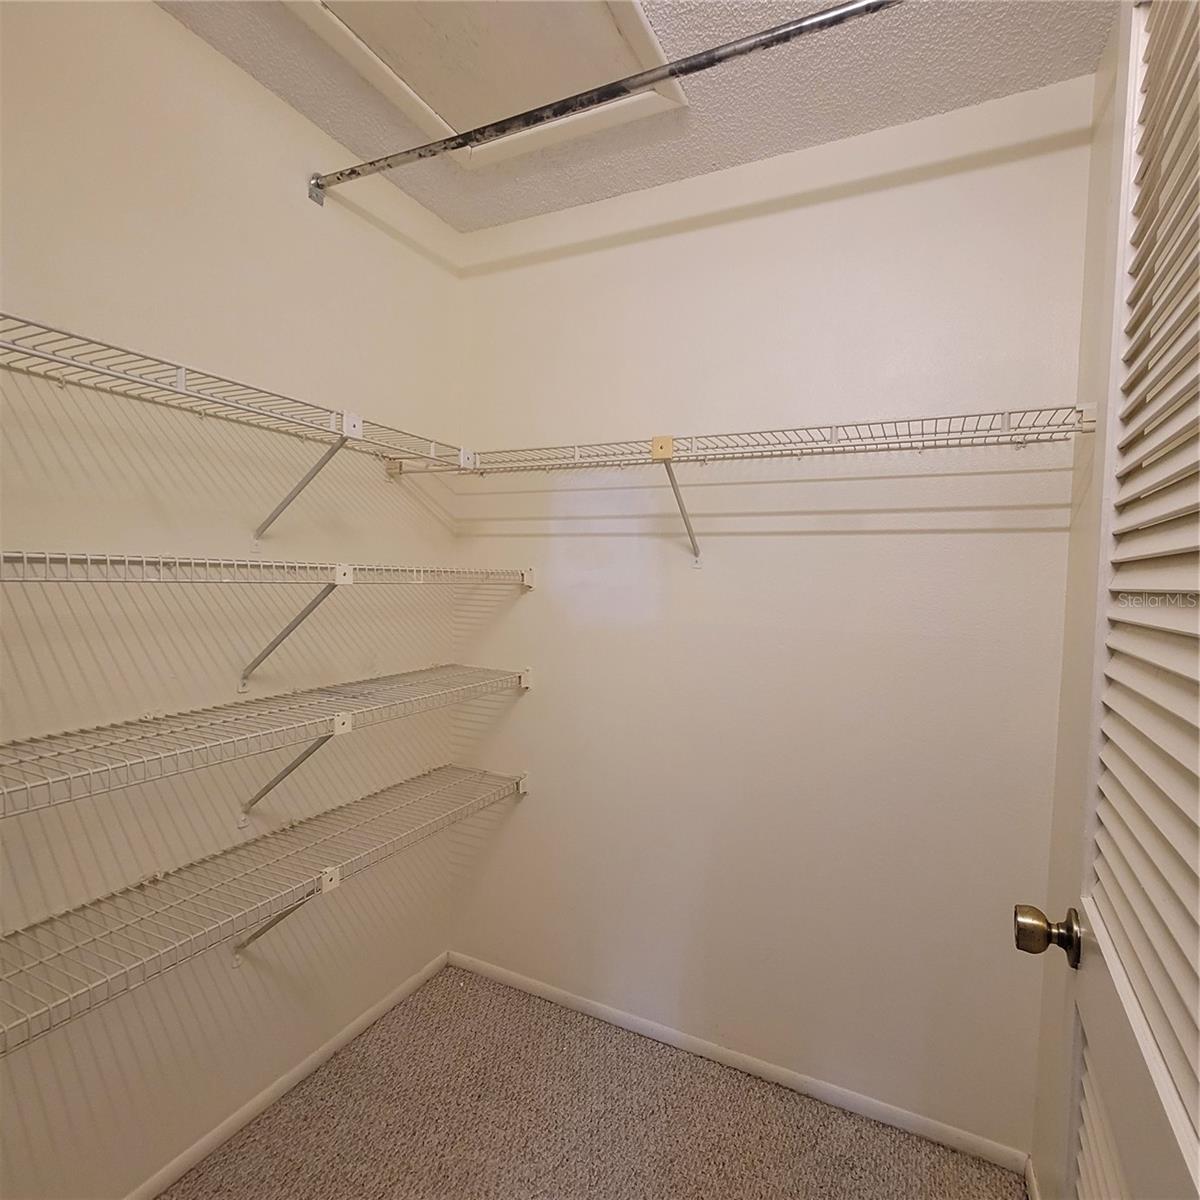 Primary Bedroom walk in closet with access to attic space